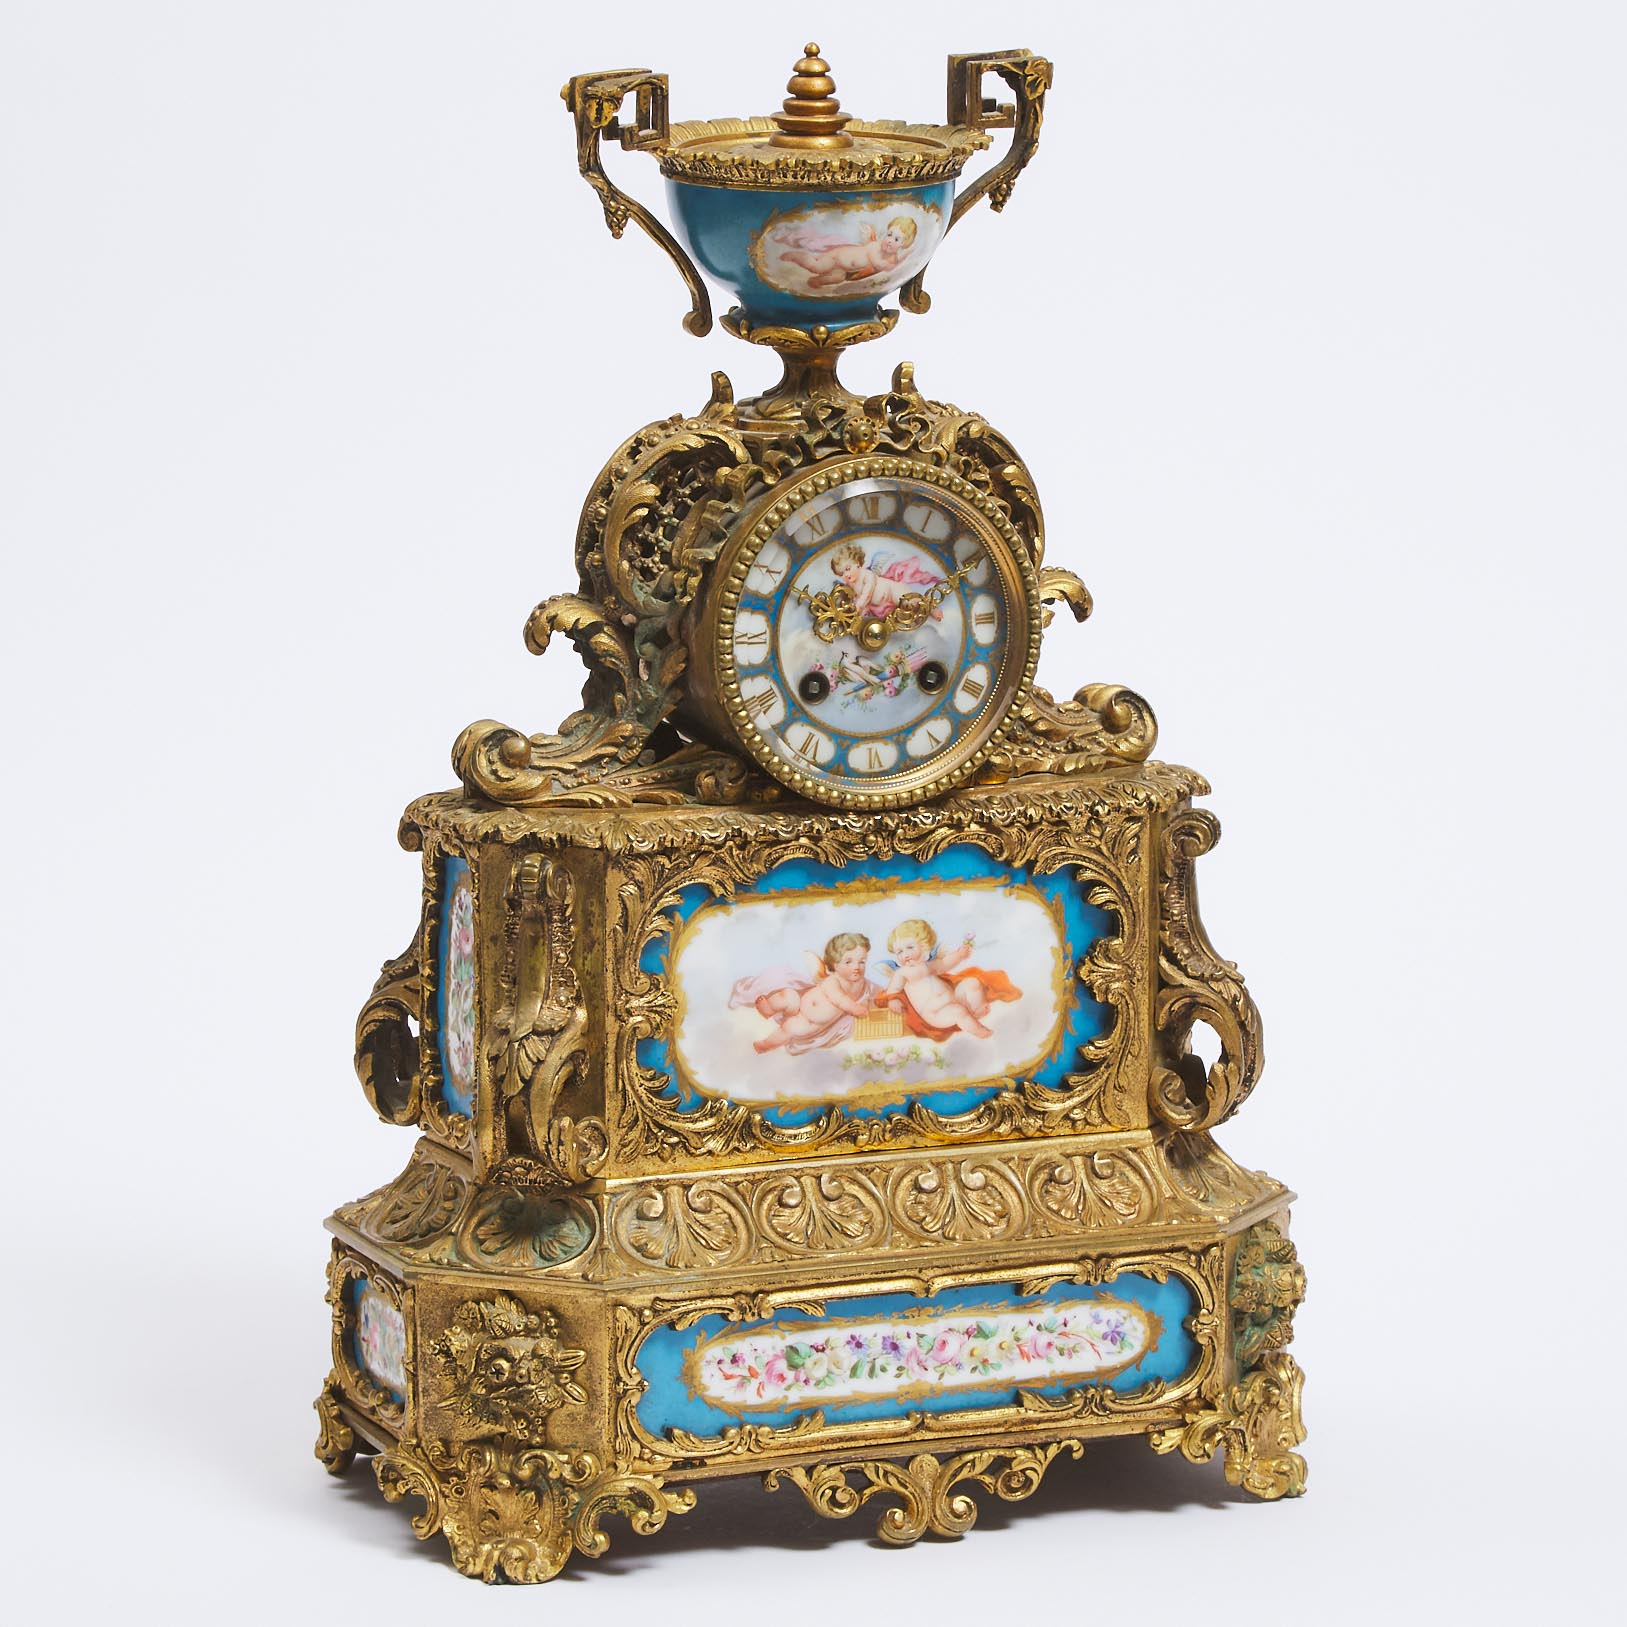 French 'Sèvres' Porcelain Mounted Ormolu Mantle Clock, mid 19th century